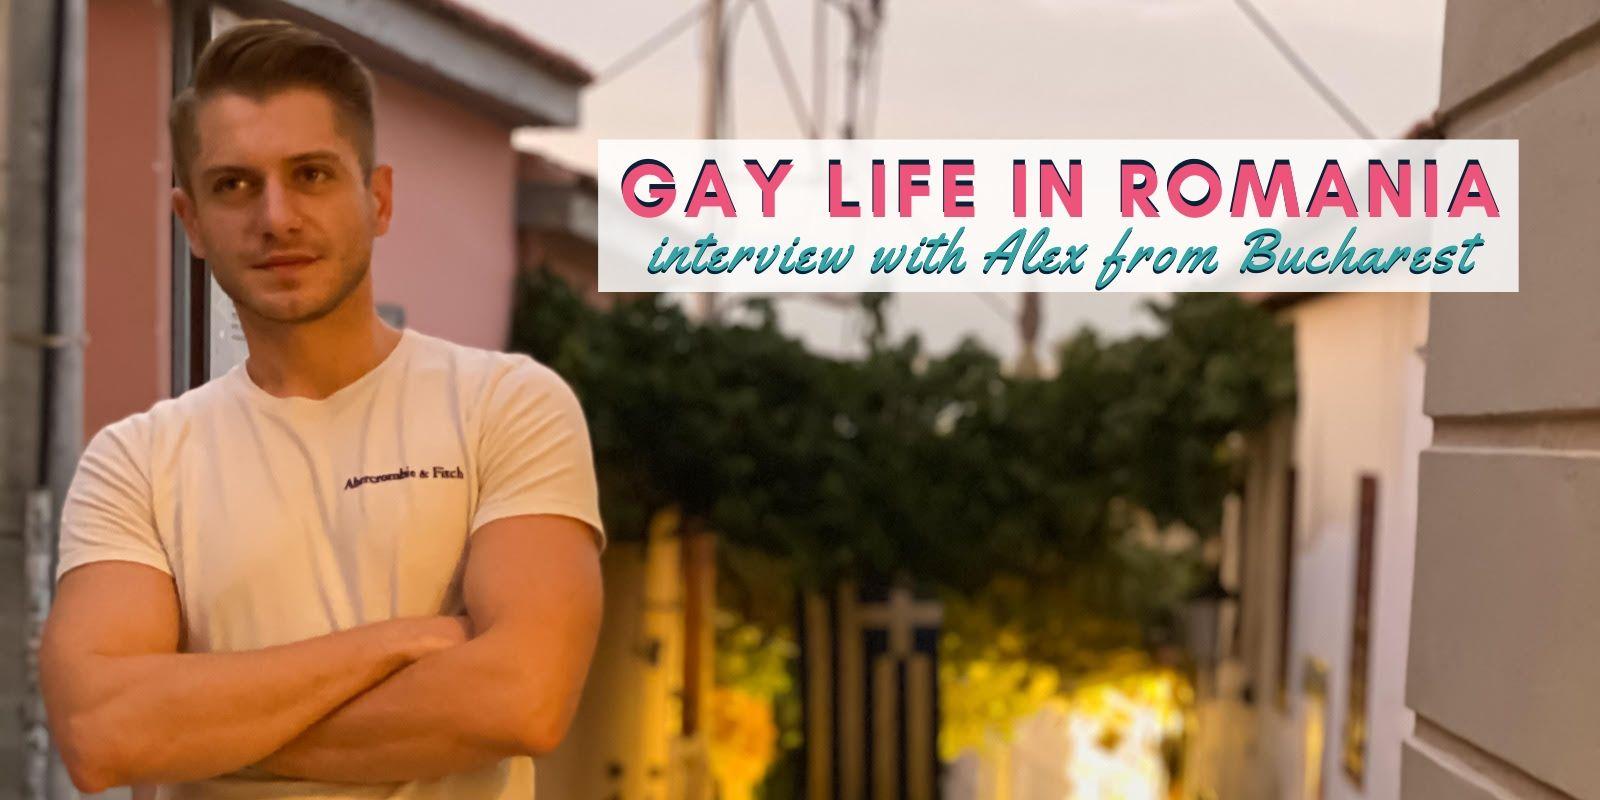 Read all about what it's like to grow up gay in Romania in our interview with local boy Alex from Bucharest